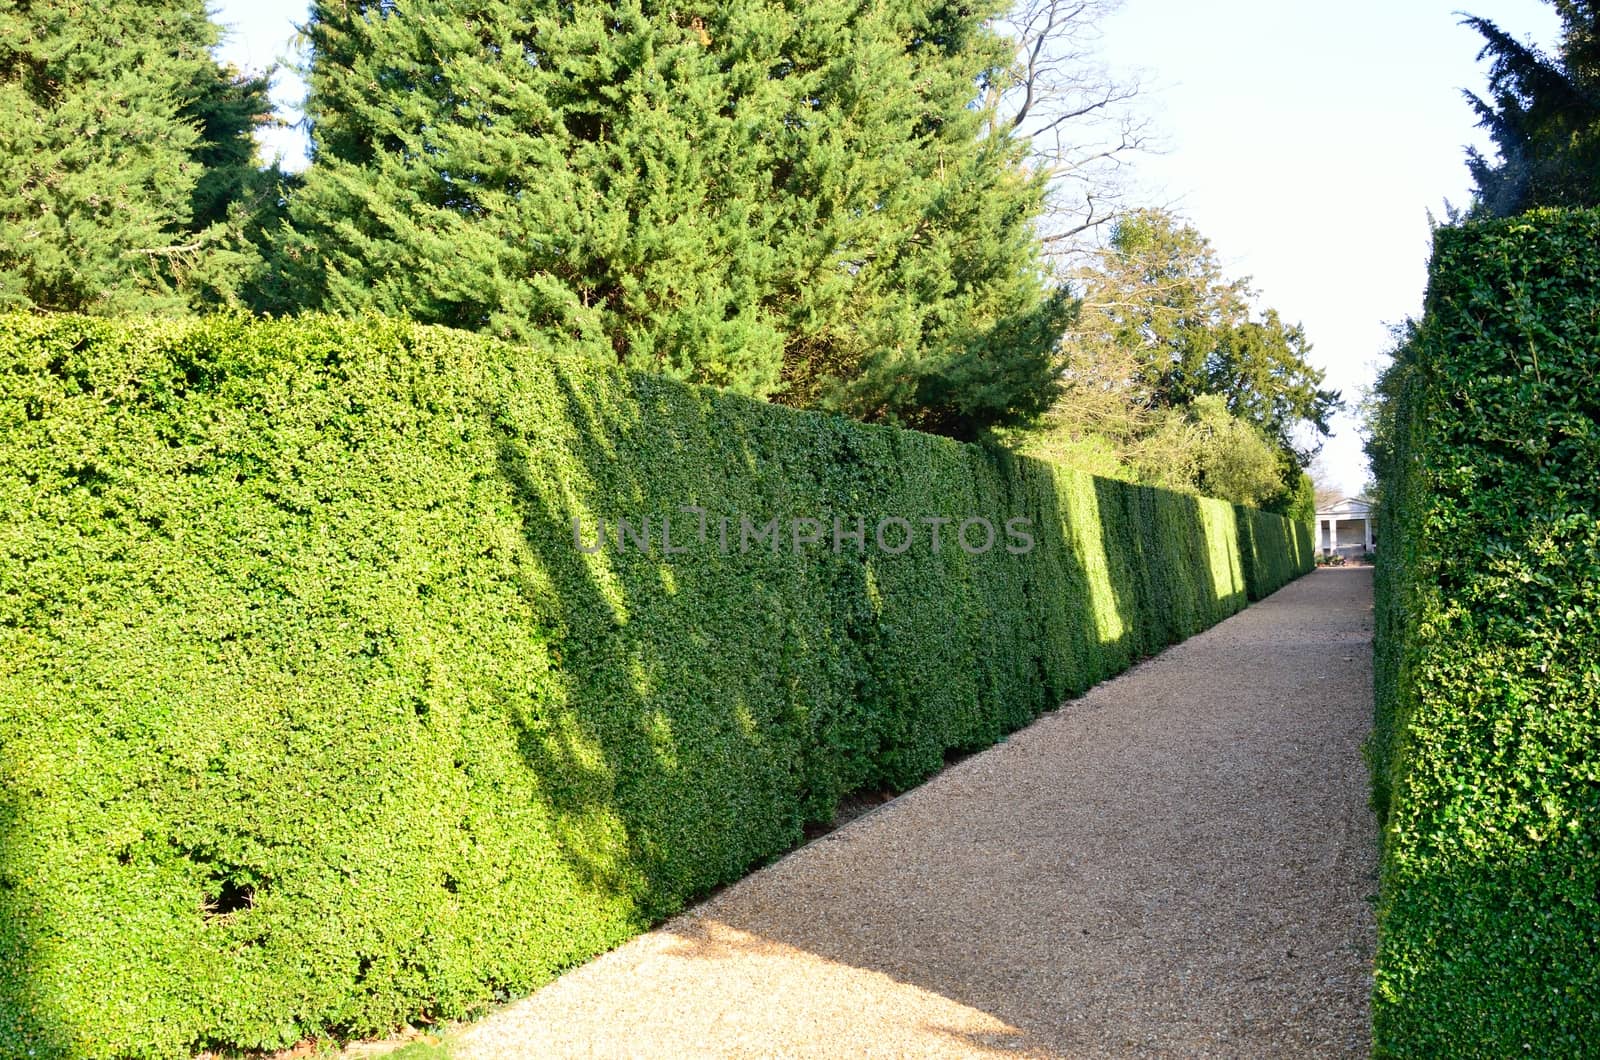 Formal hedge and path